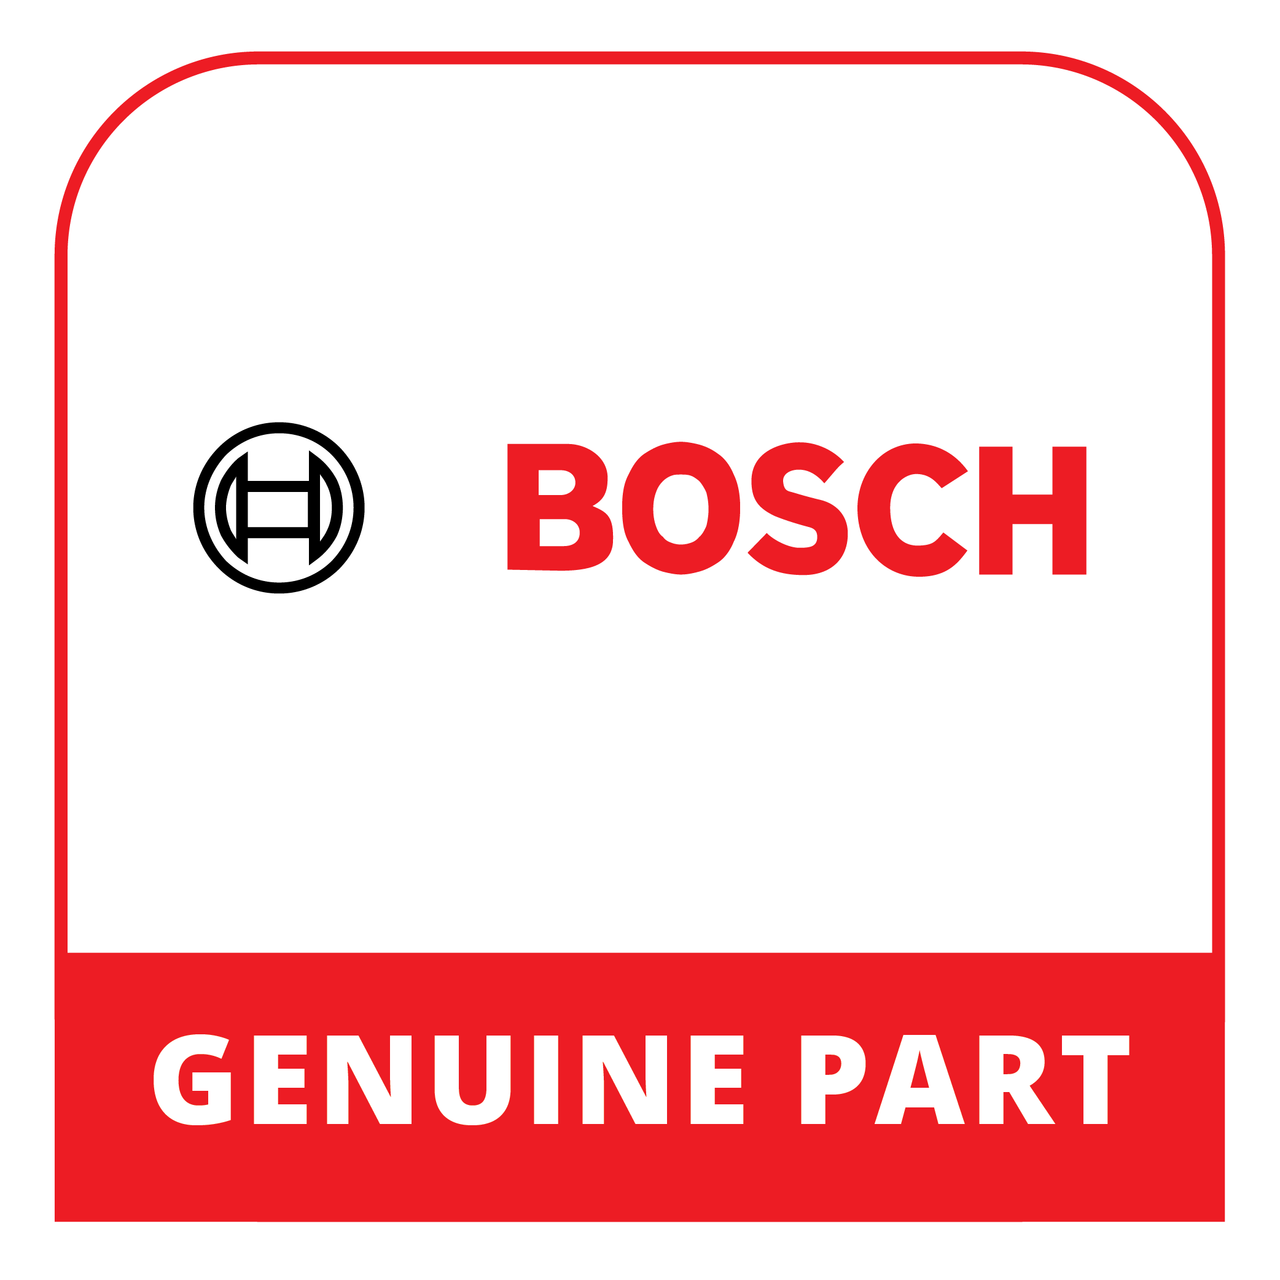 Bosch (Thermador) 18066846 - Installation Instructions - Genuine Bosch (Thermador) Part